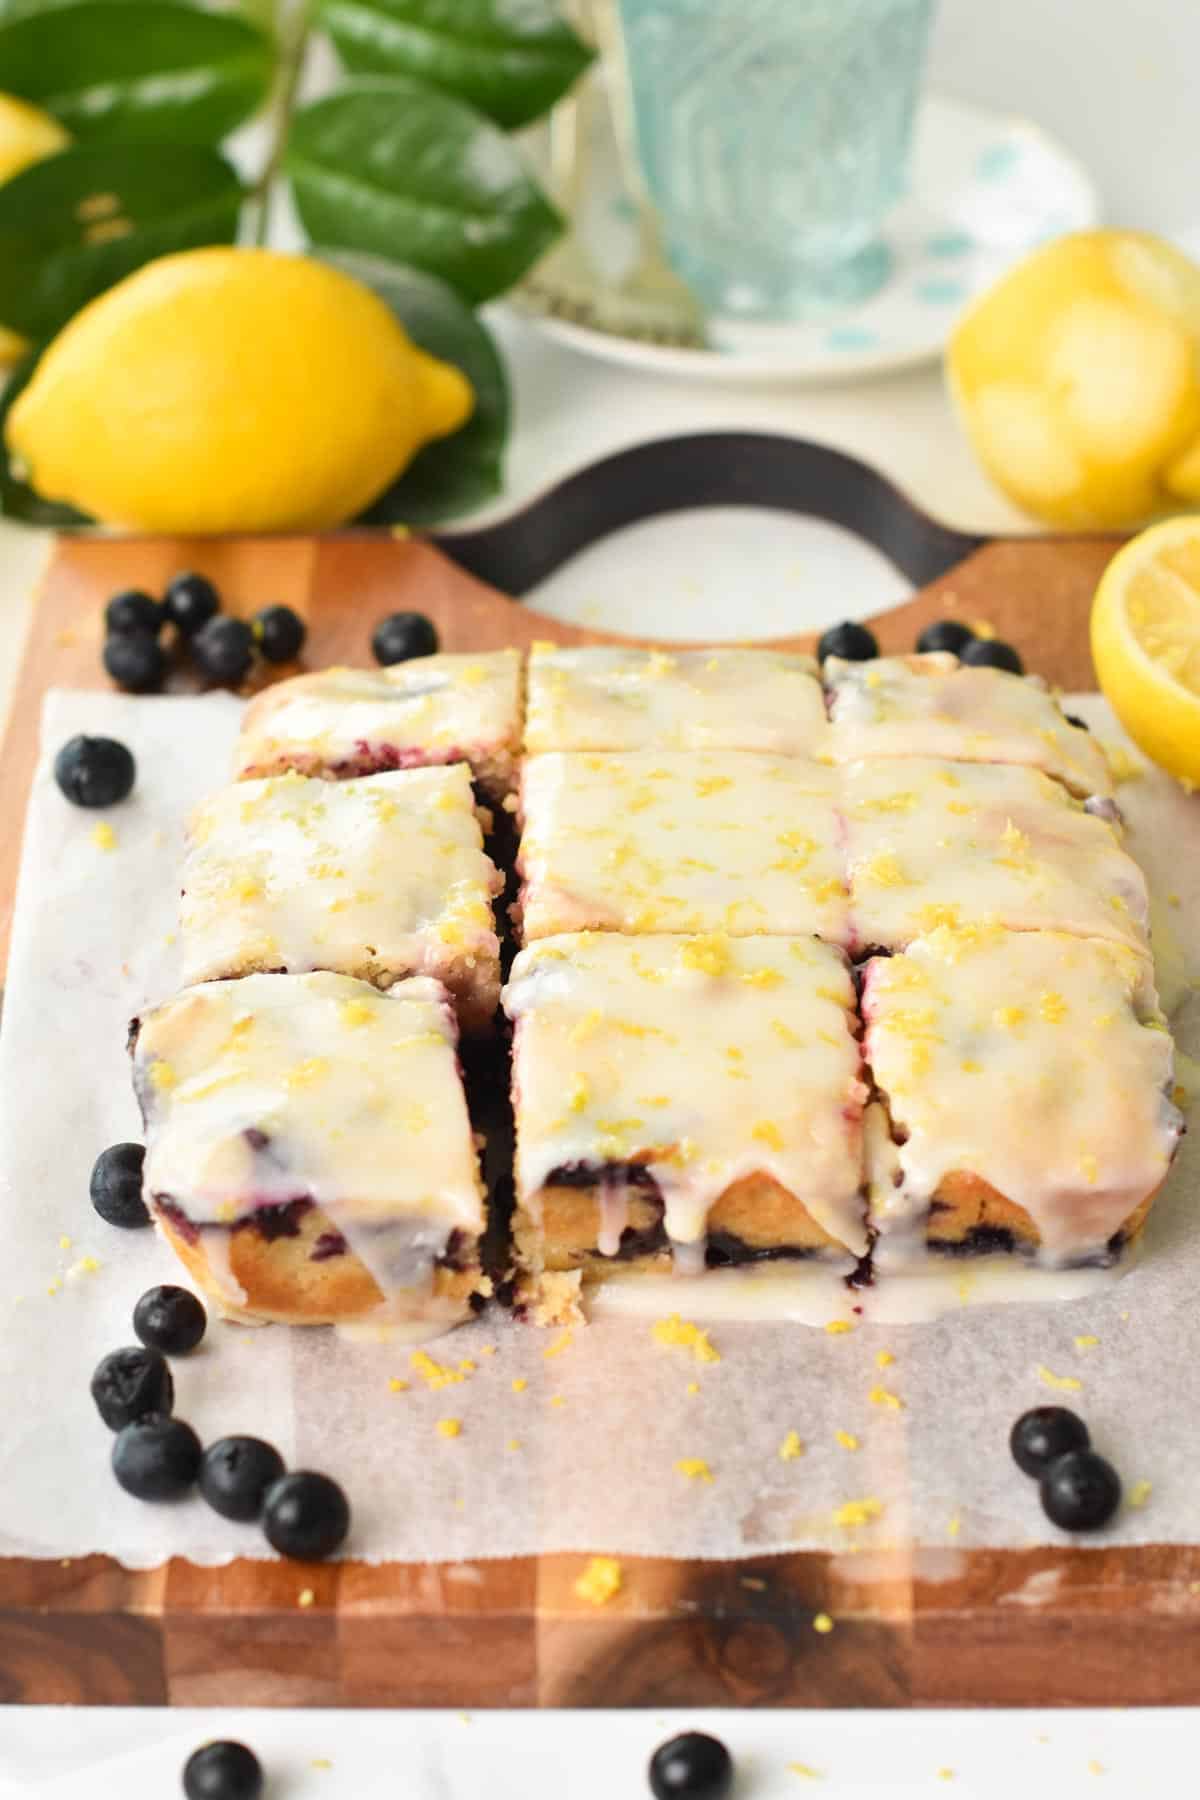 A blueberry lemon blondie with icing, cut into 9 squares on a wooden chopping board with lemons and blueberries around.